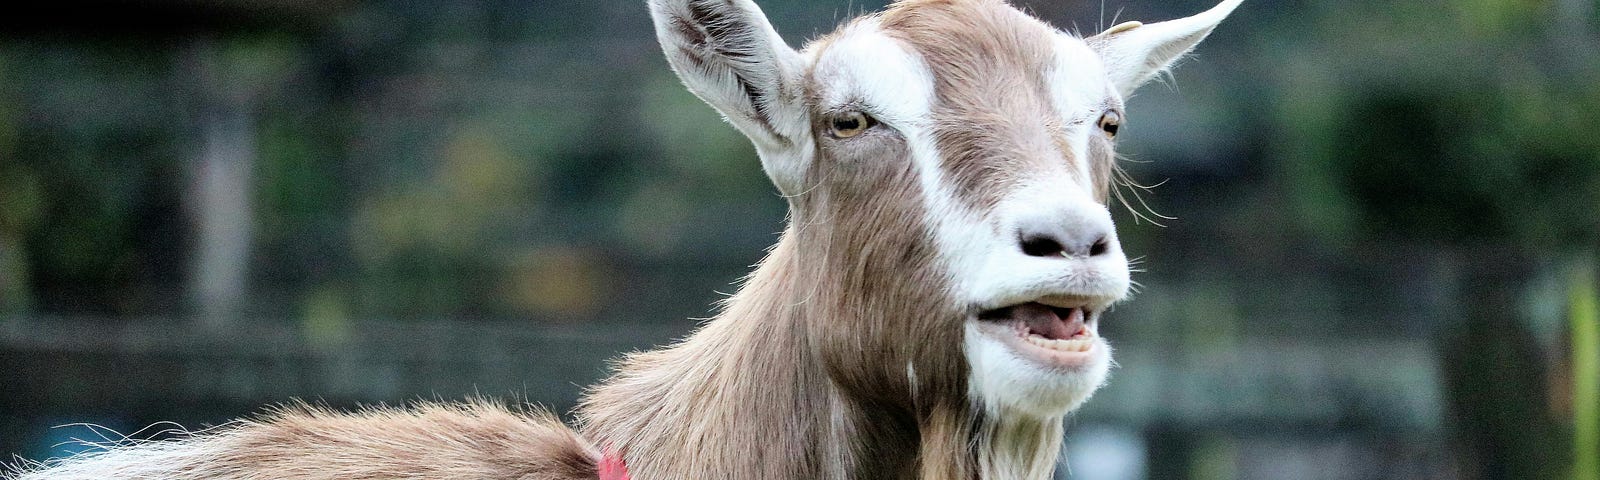 A goat with a humorous expression, bleating in a calm environment. This image symbolizes letting go of small annoyances and finding humor in everyday life.